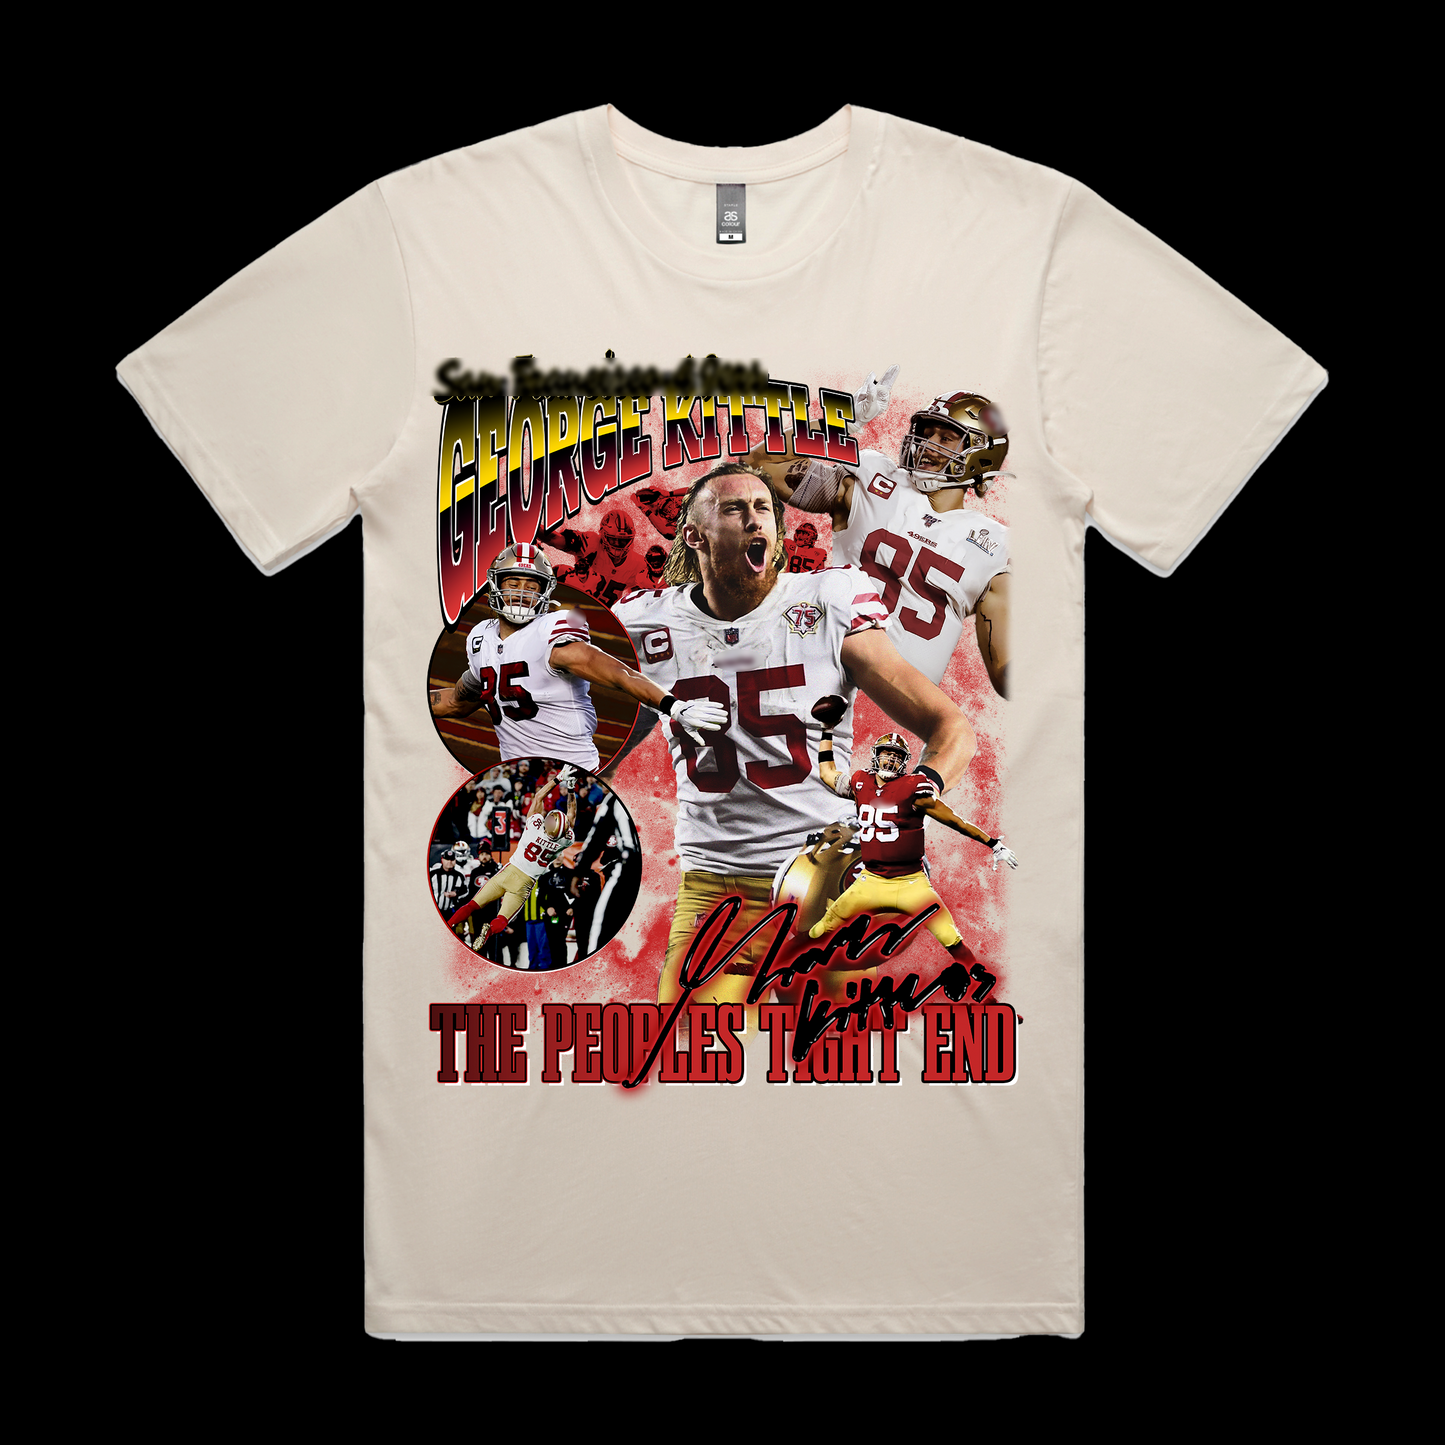 George Kittle "The Peoples Tight End"